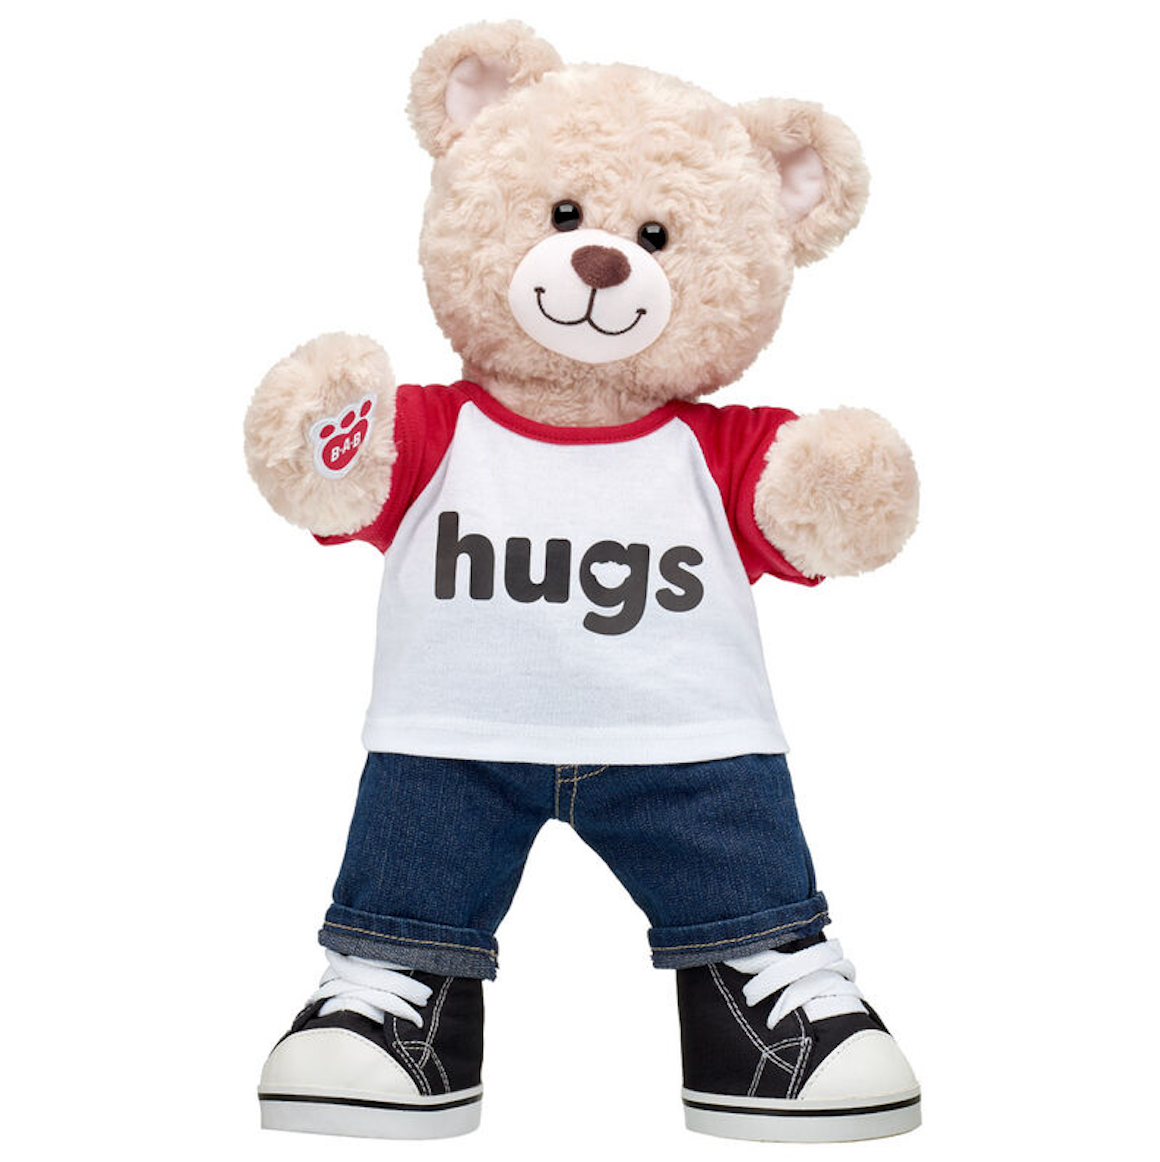 Timeless Teddy Emotional Support Gift Set